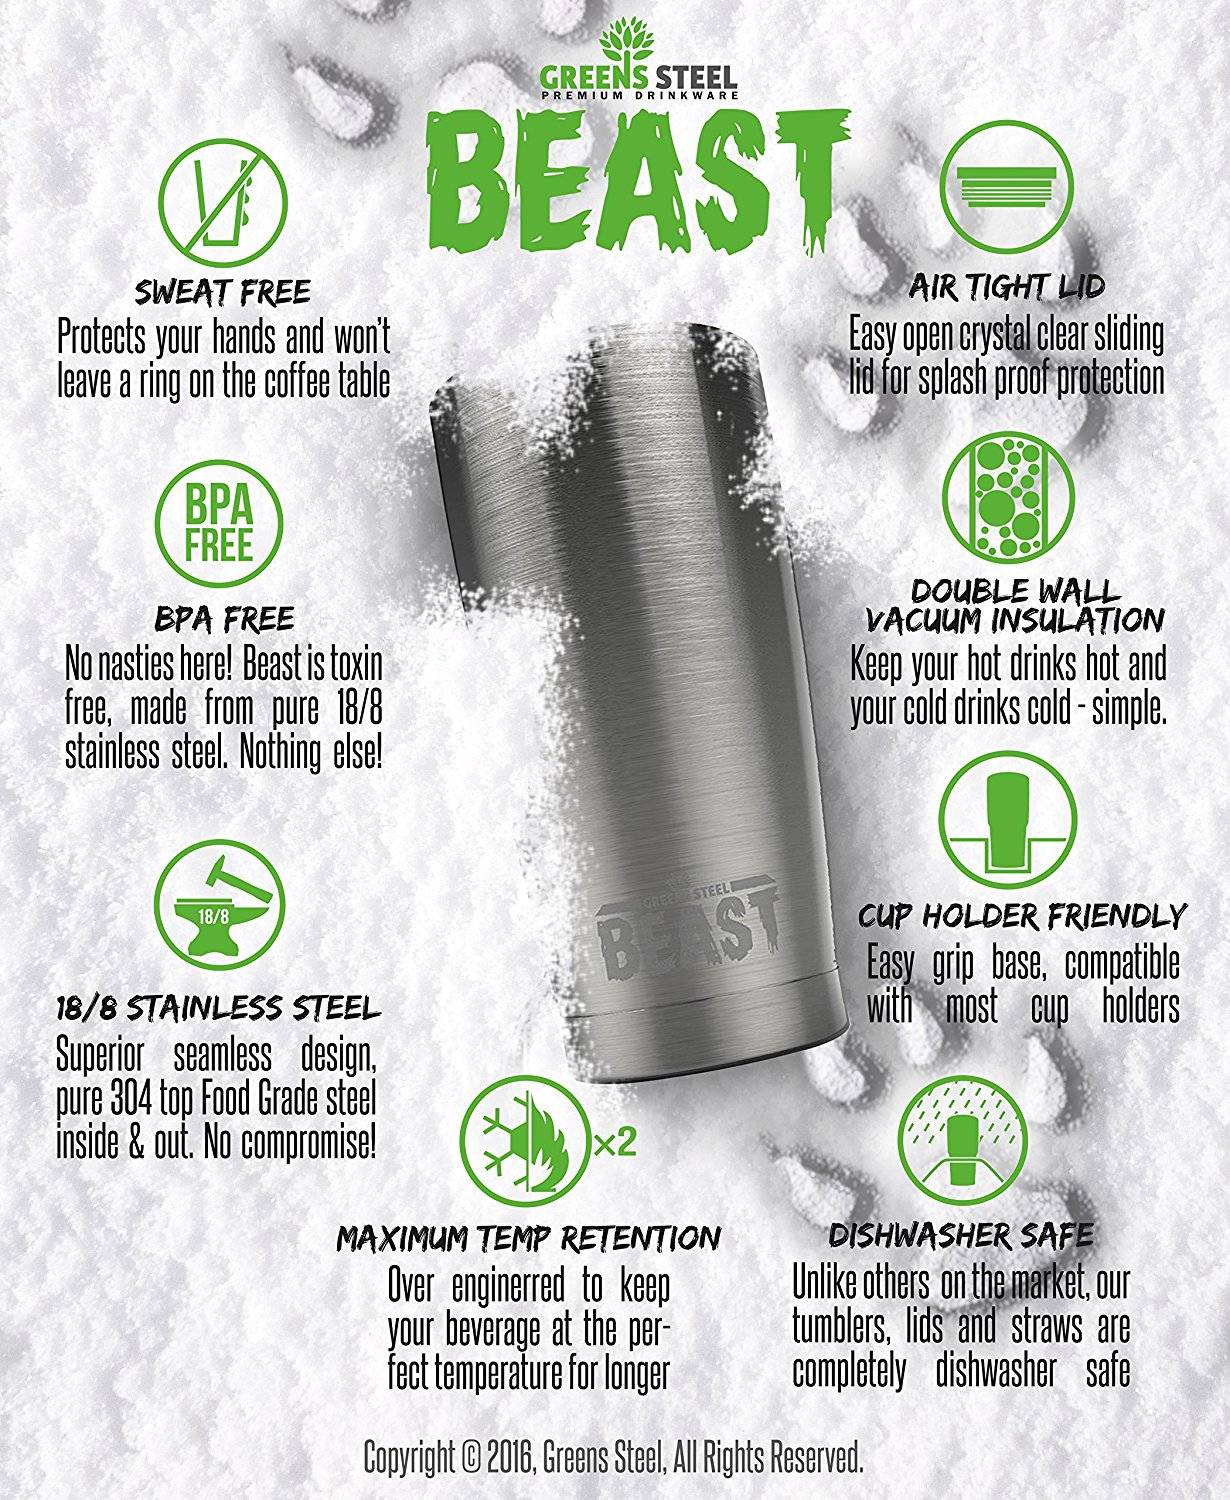 The Beast 20 oz. and 30 oz. Tumblers have a lifetime warranty and a